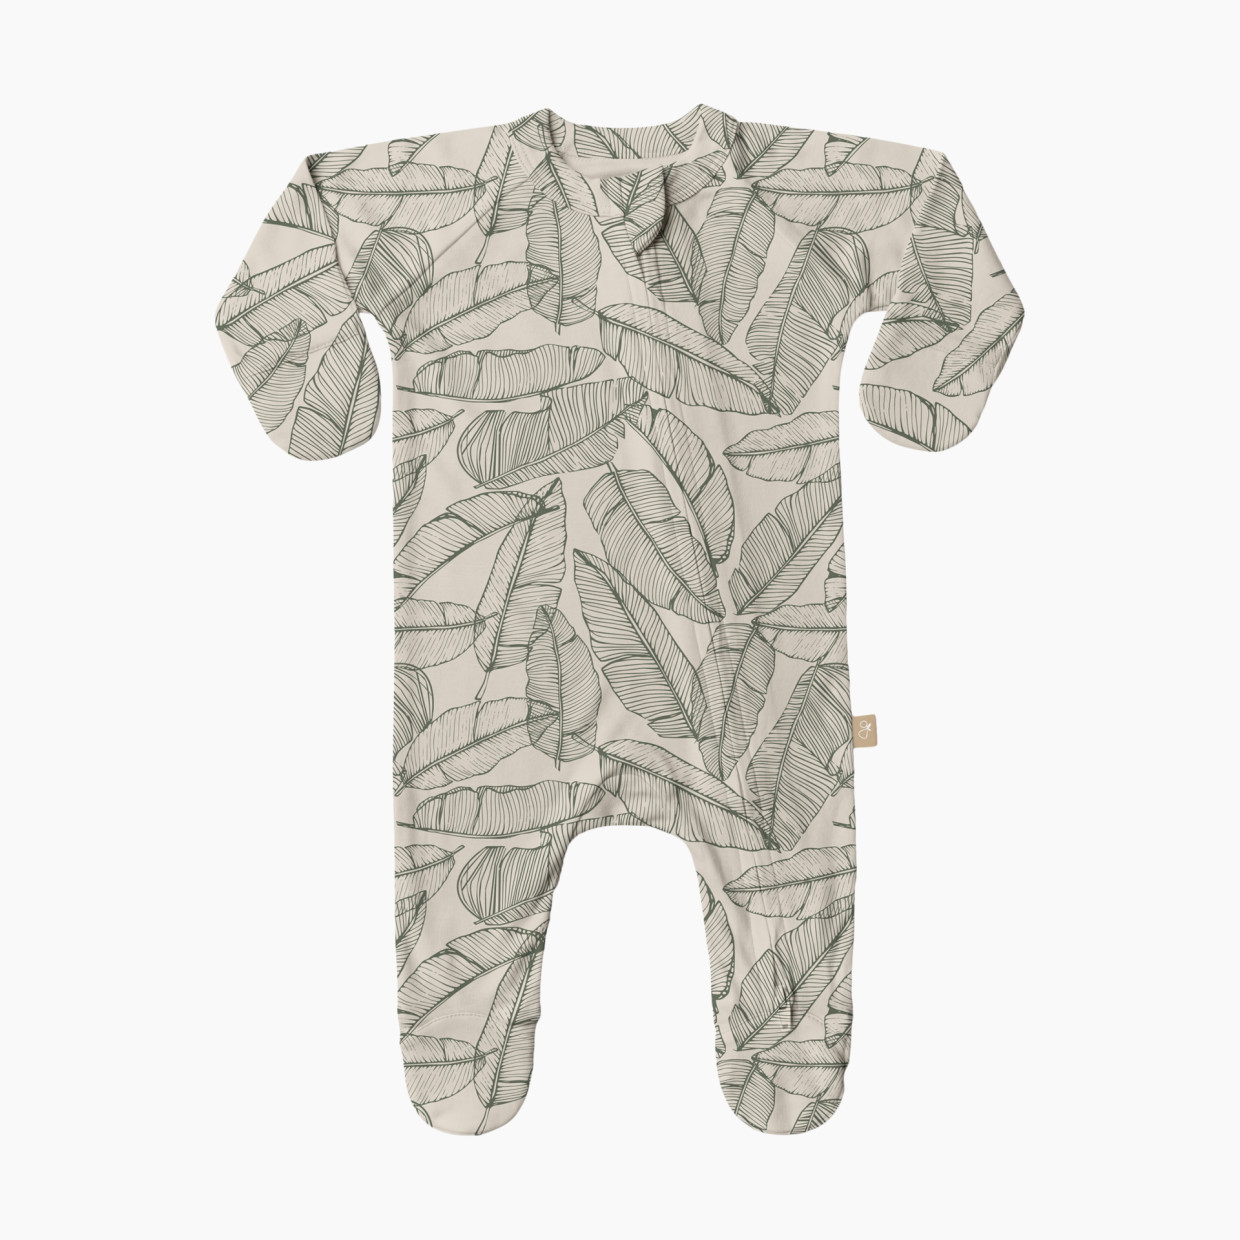 Goumi Kids x Babylist Grow With You Footie - Loose Fit - Banana Leaf, 3-6 M.